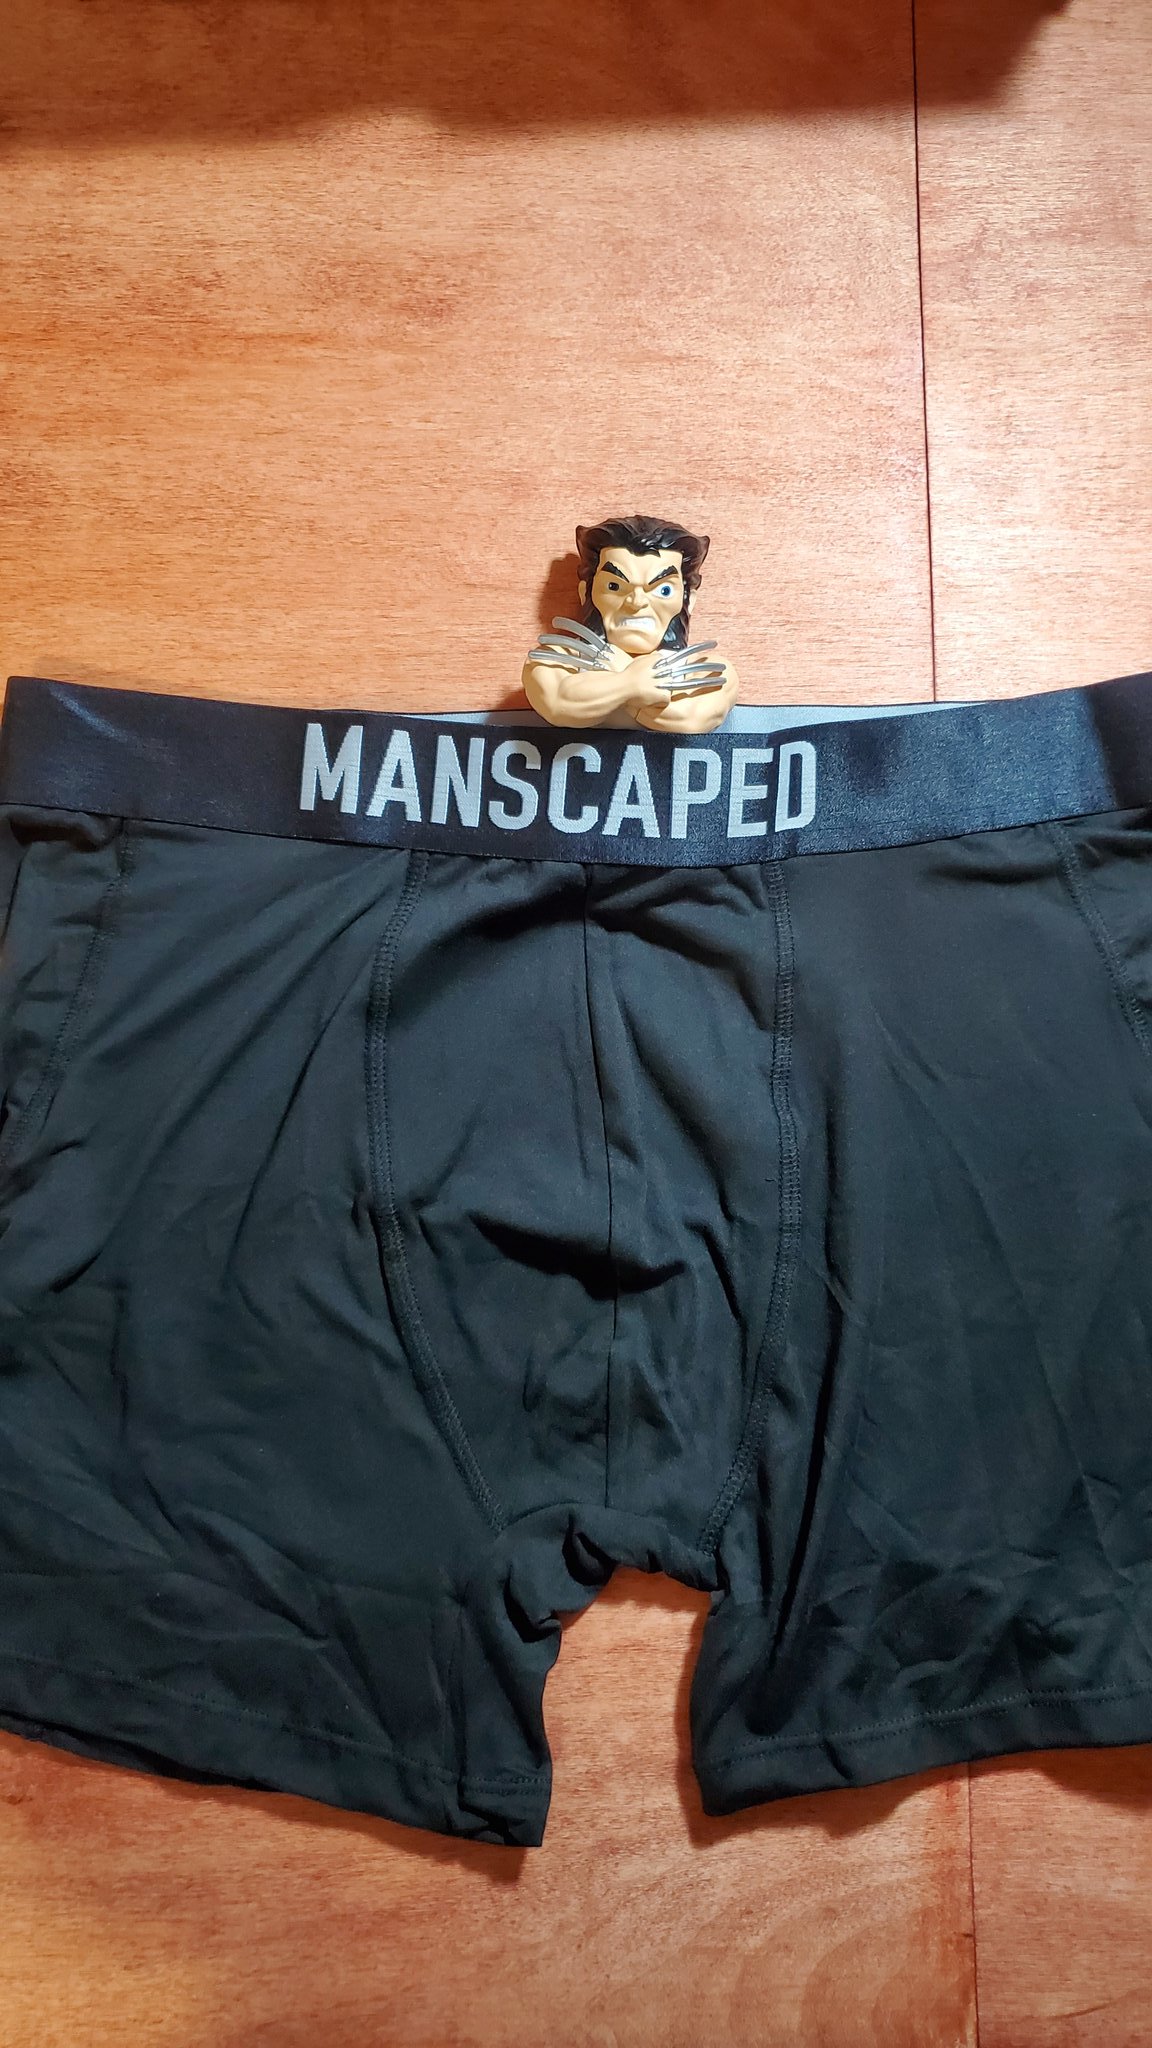 Adrian Ruiz on X: Manscaped Boxers! Anti-chafing cooling boxer briefs. I  am wearing them now as I type this and they are 10/10 most comfy boxer  briefs I now own. Comes in